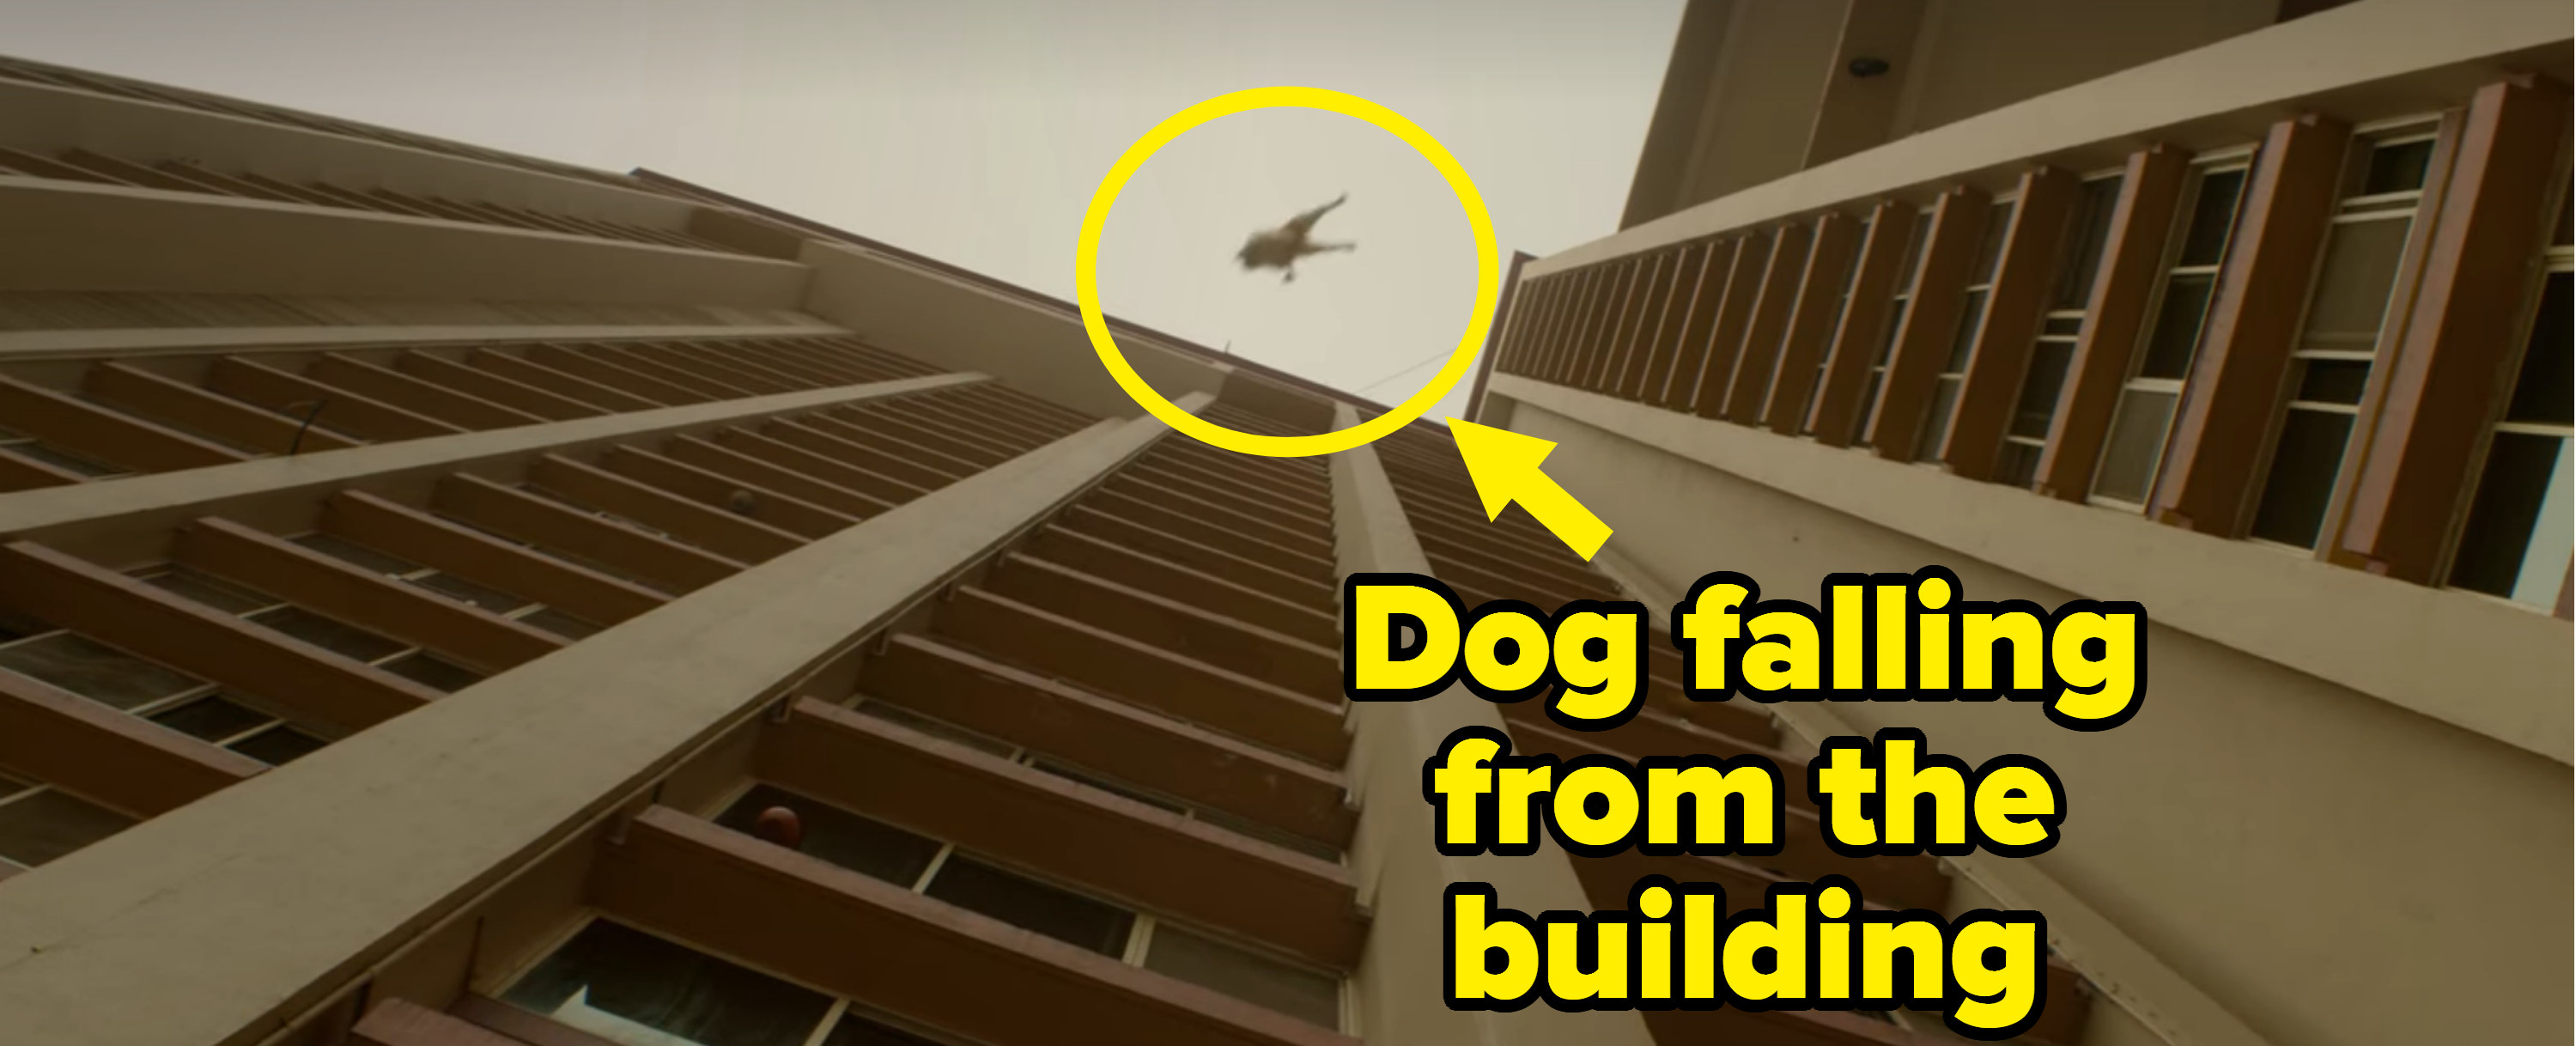 Dog falling from a building